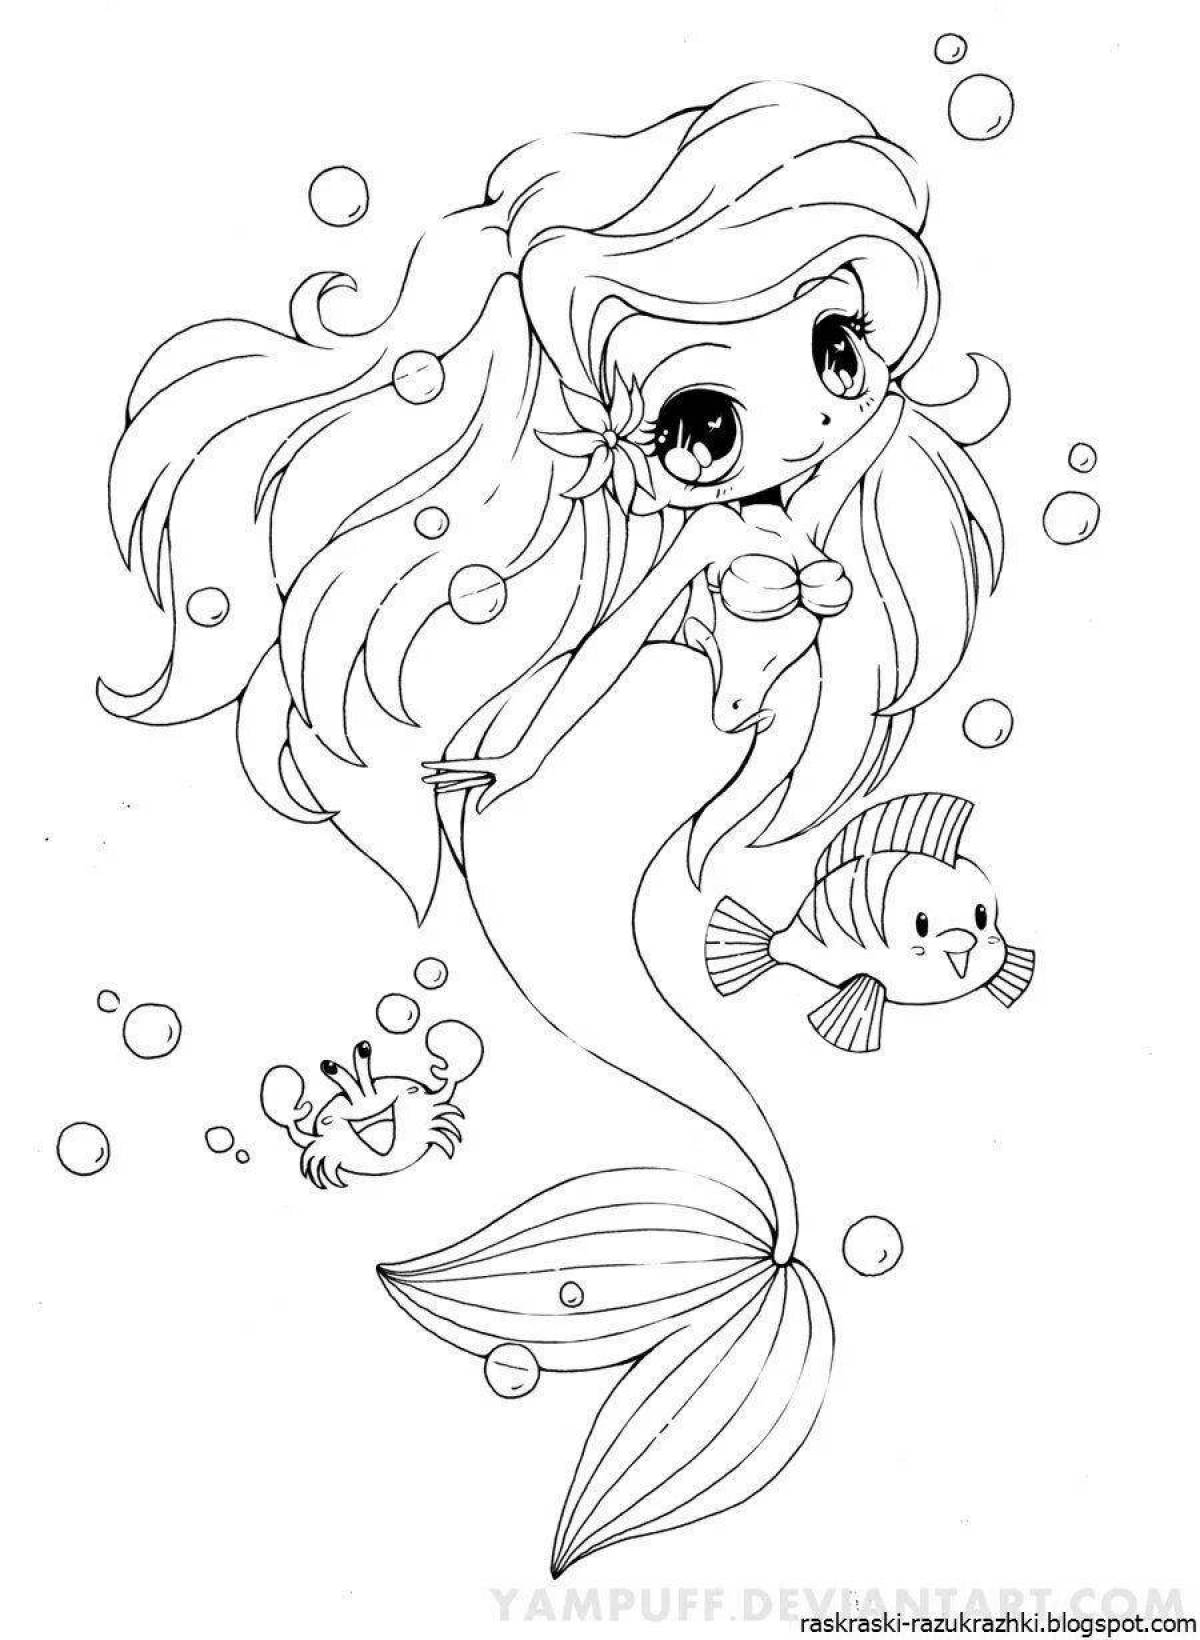 Coloring pages with taste for girls 11 years old, cute